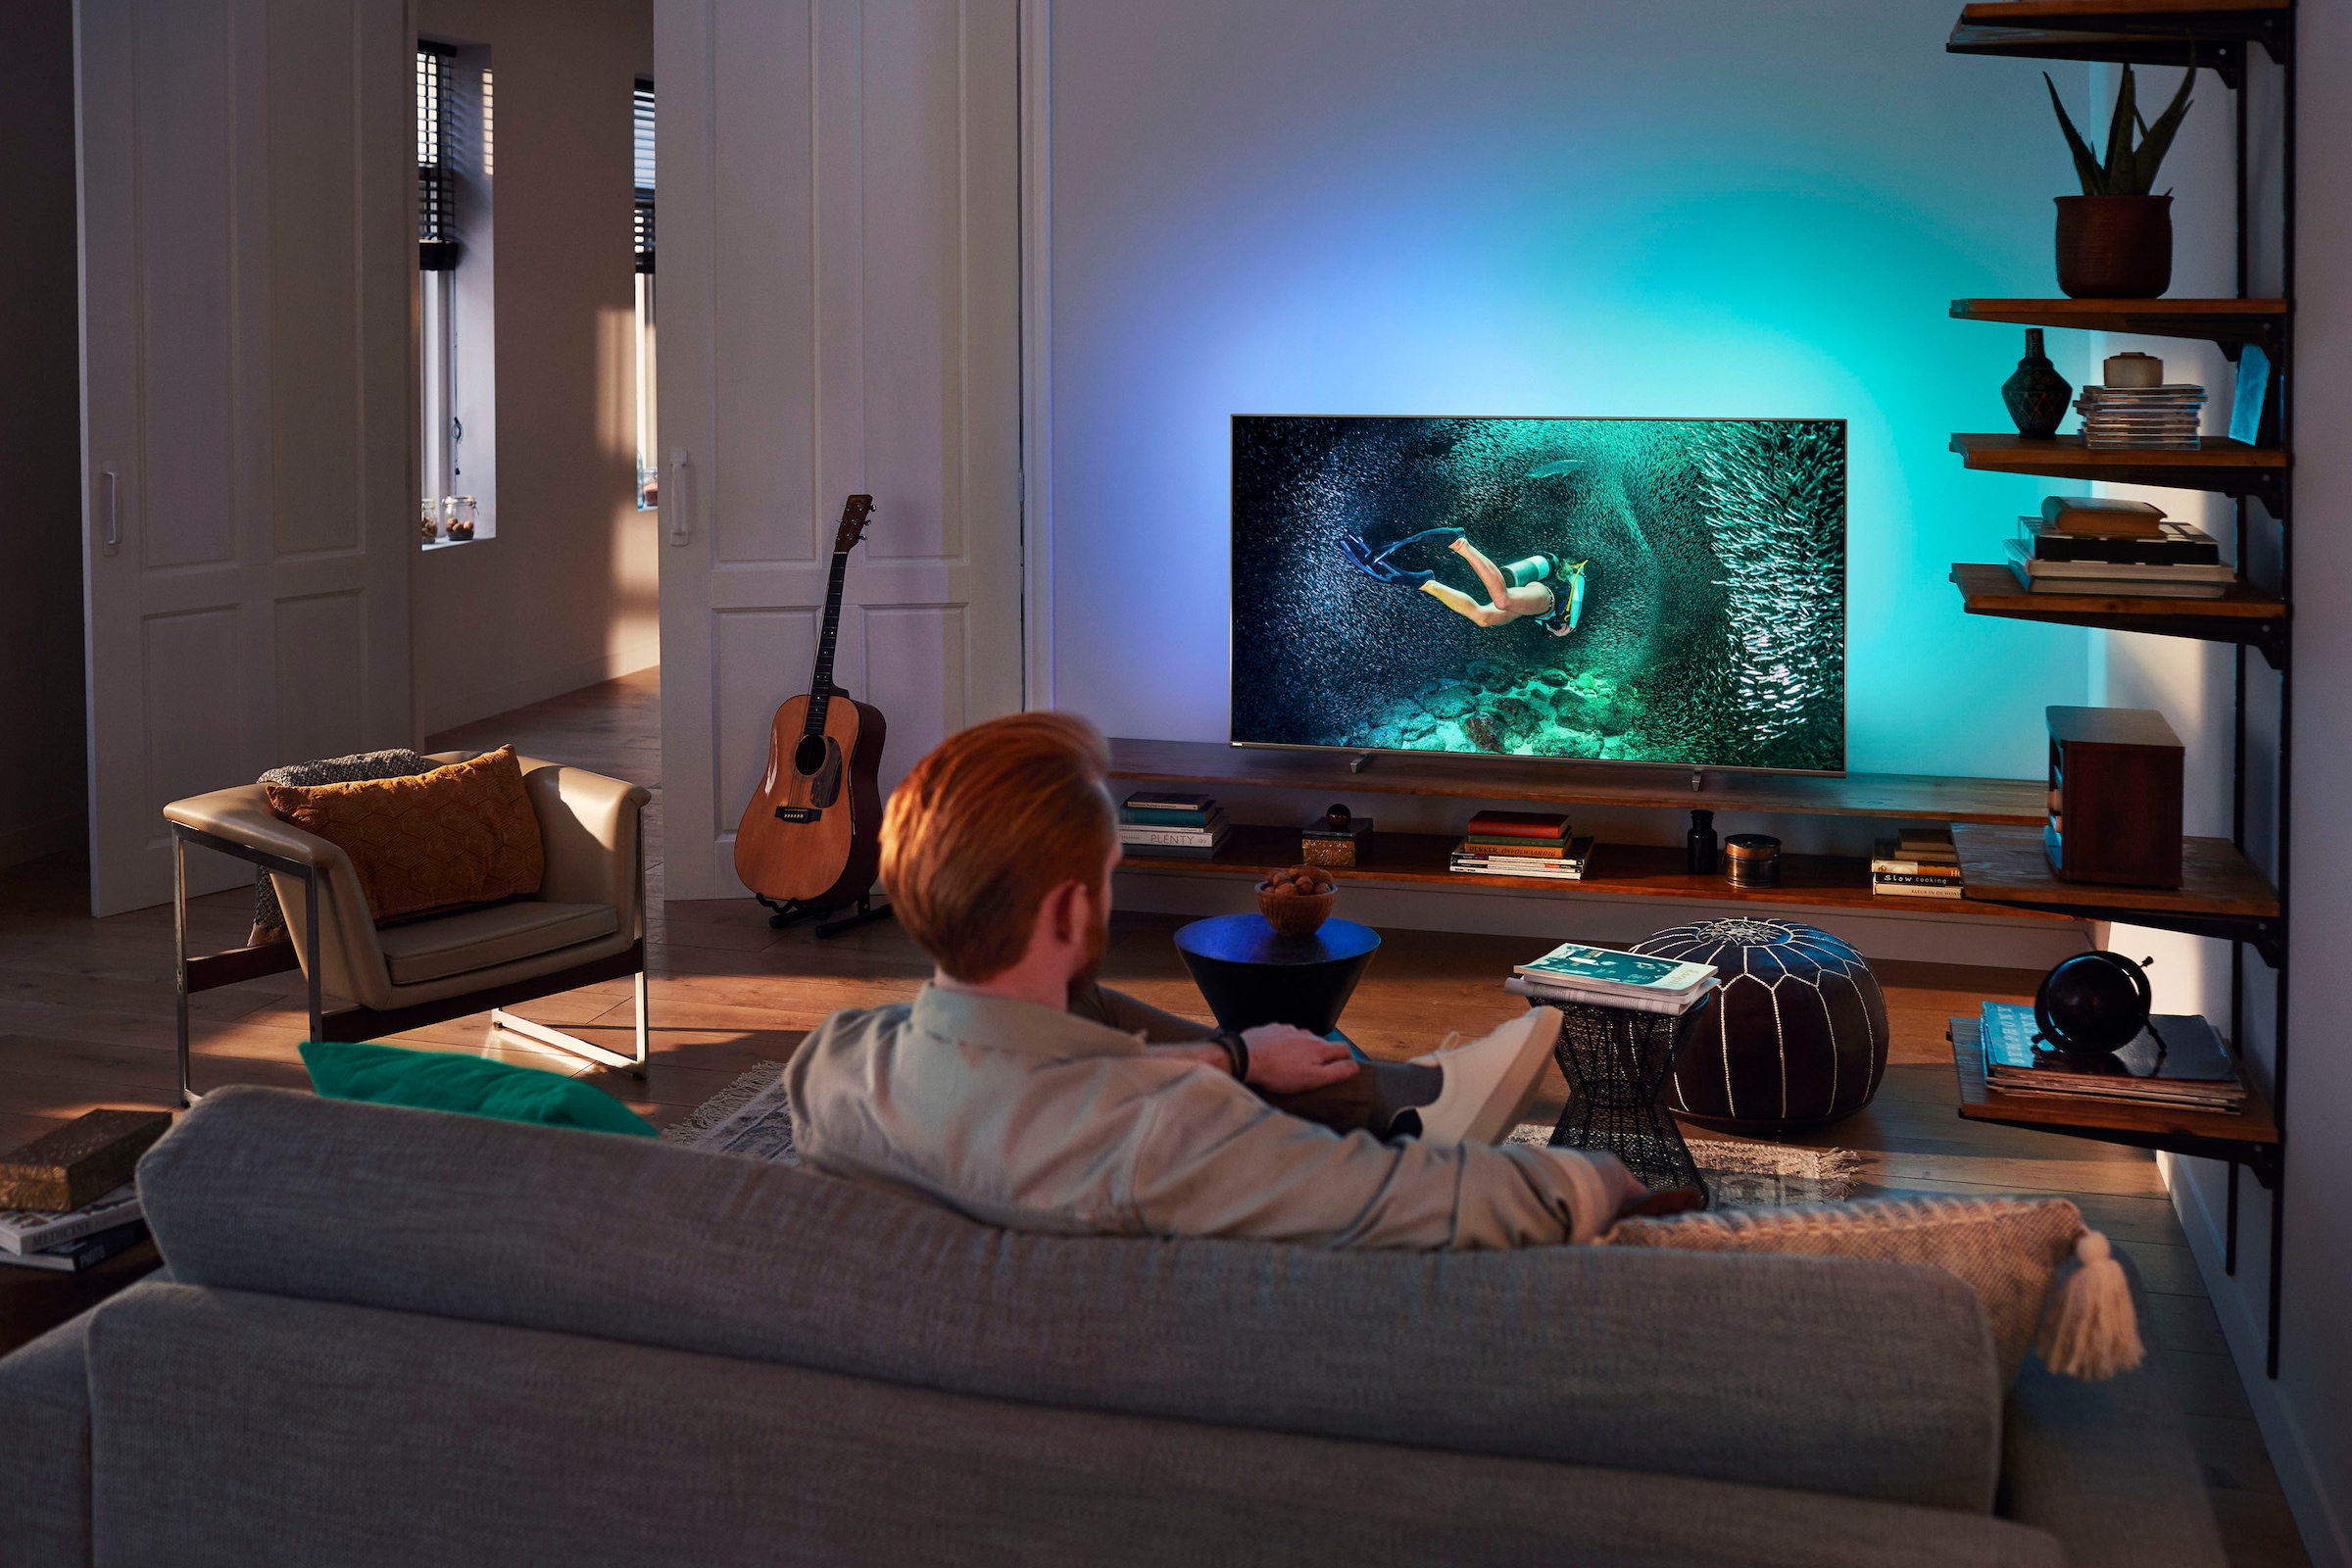 Philips LED-Fernseher, 139 cm/55 Zoll, 4K Ultra HD, Android TV-Smart-TV, 3-seitiges Ambilight